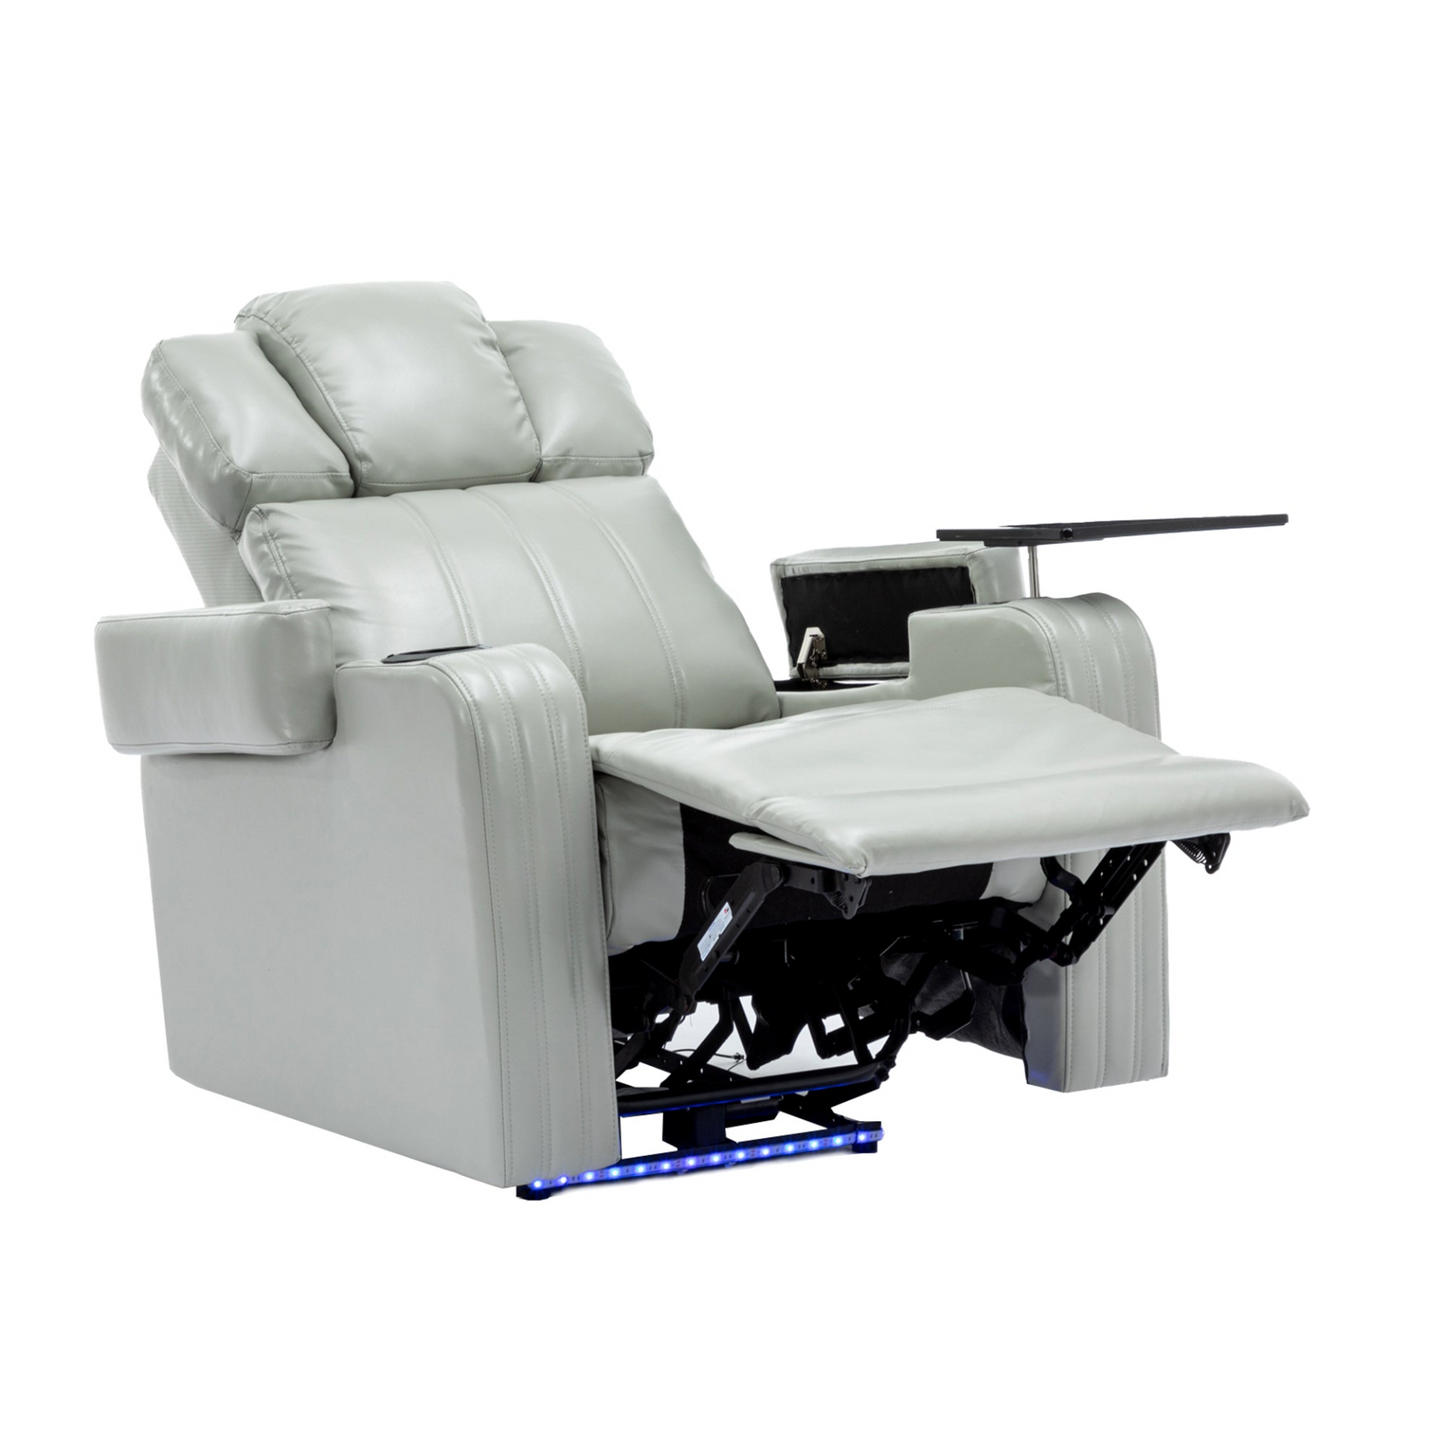 PU Leather Power Recliner Individual Seat Home Theater Recliner - Grey, Goodies N Stuff